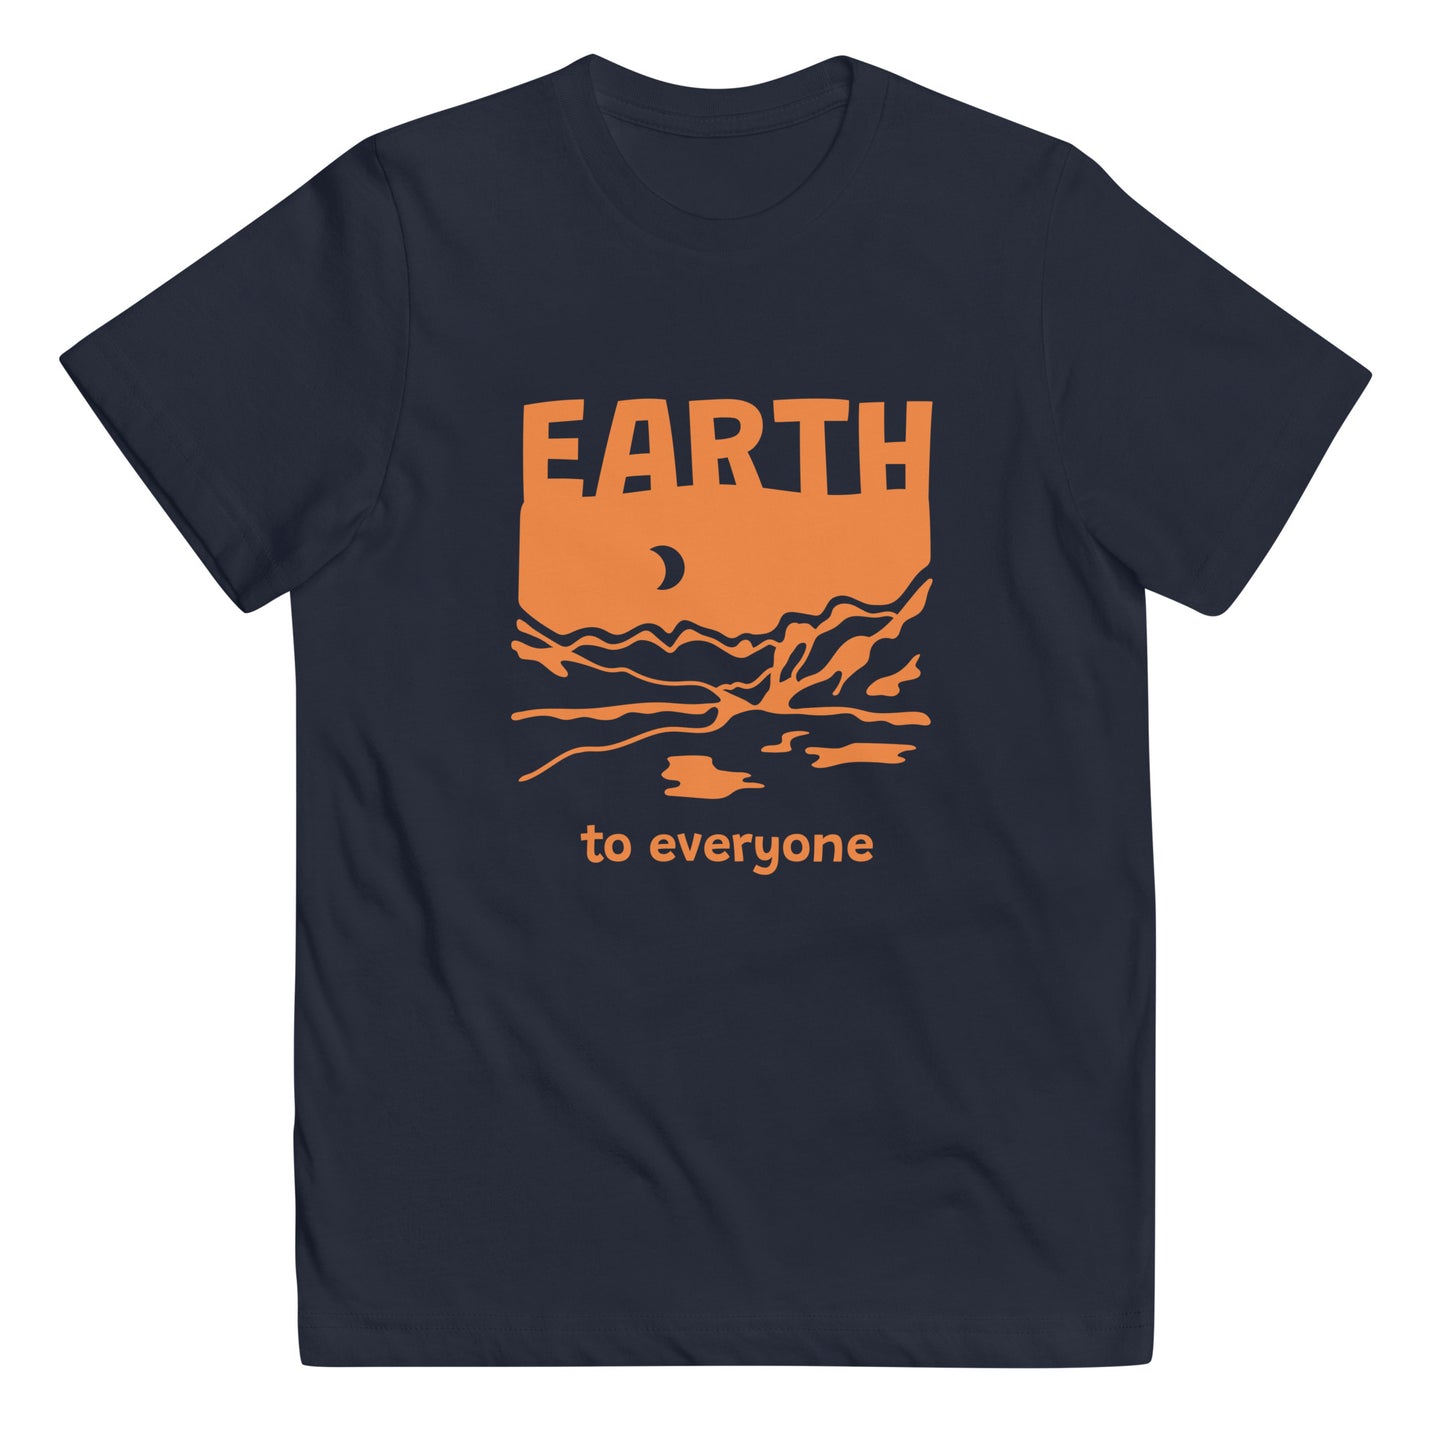 Earth Youth jersey t-shirt